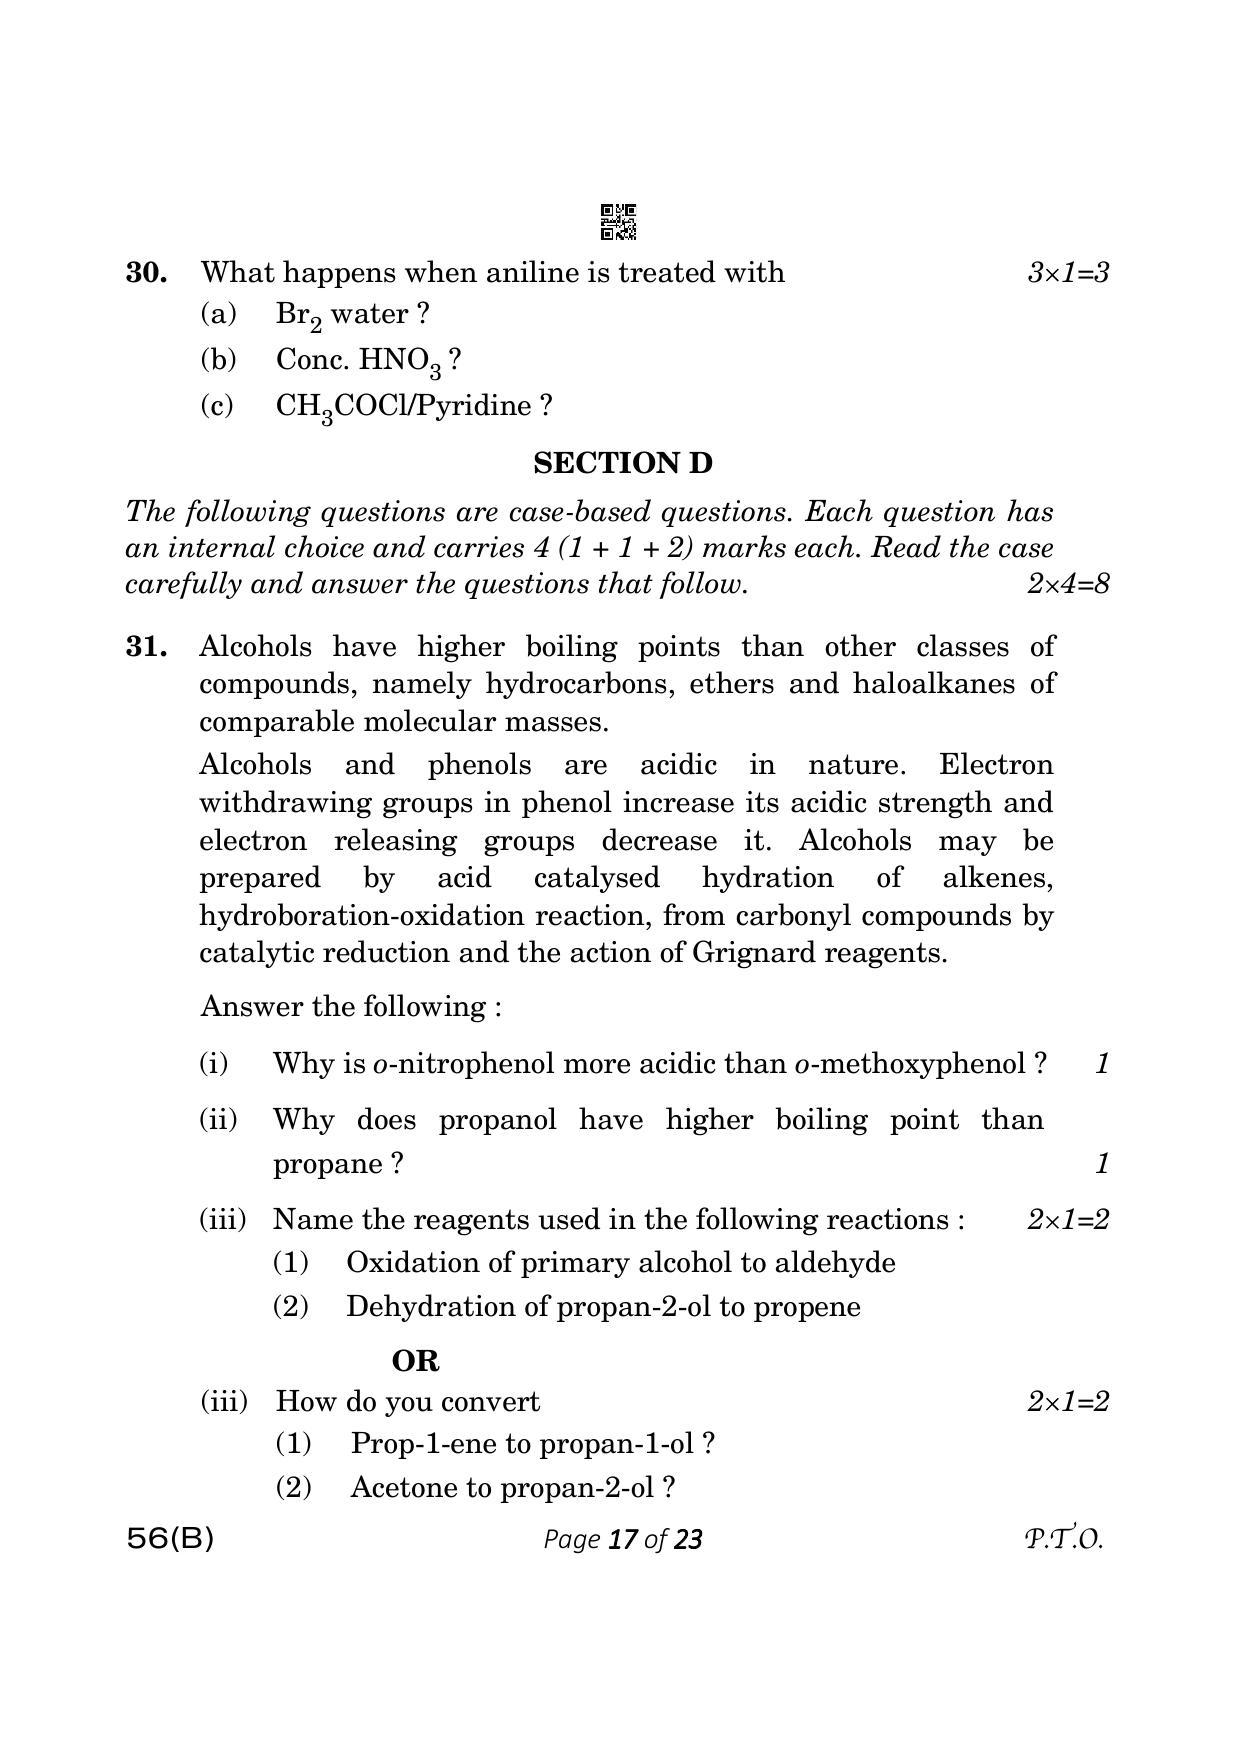 CBSE Class 12 56-B Chemistry 2023 (Compartment) Question Paper - Page 17